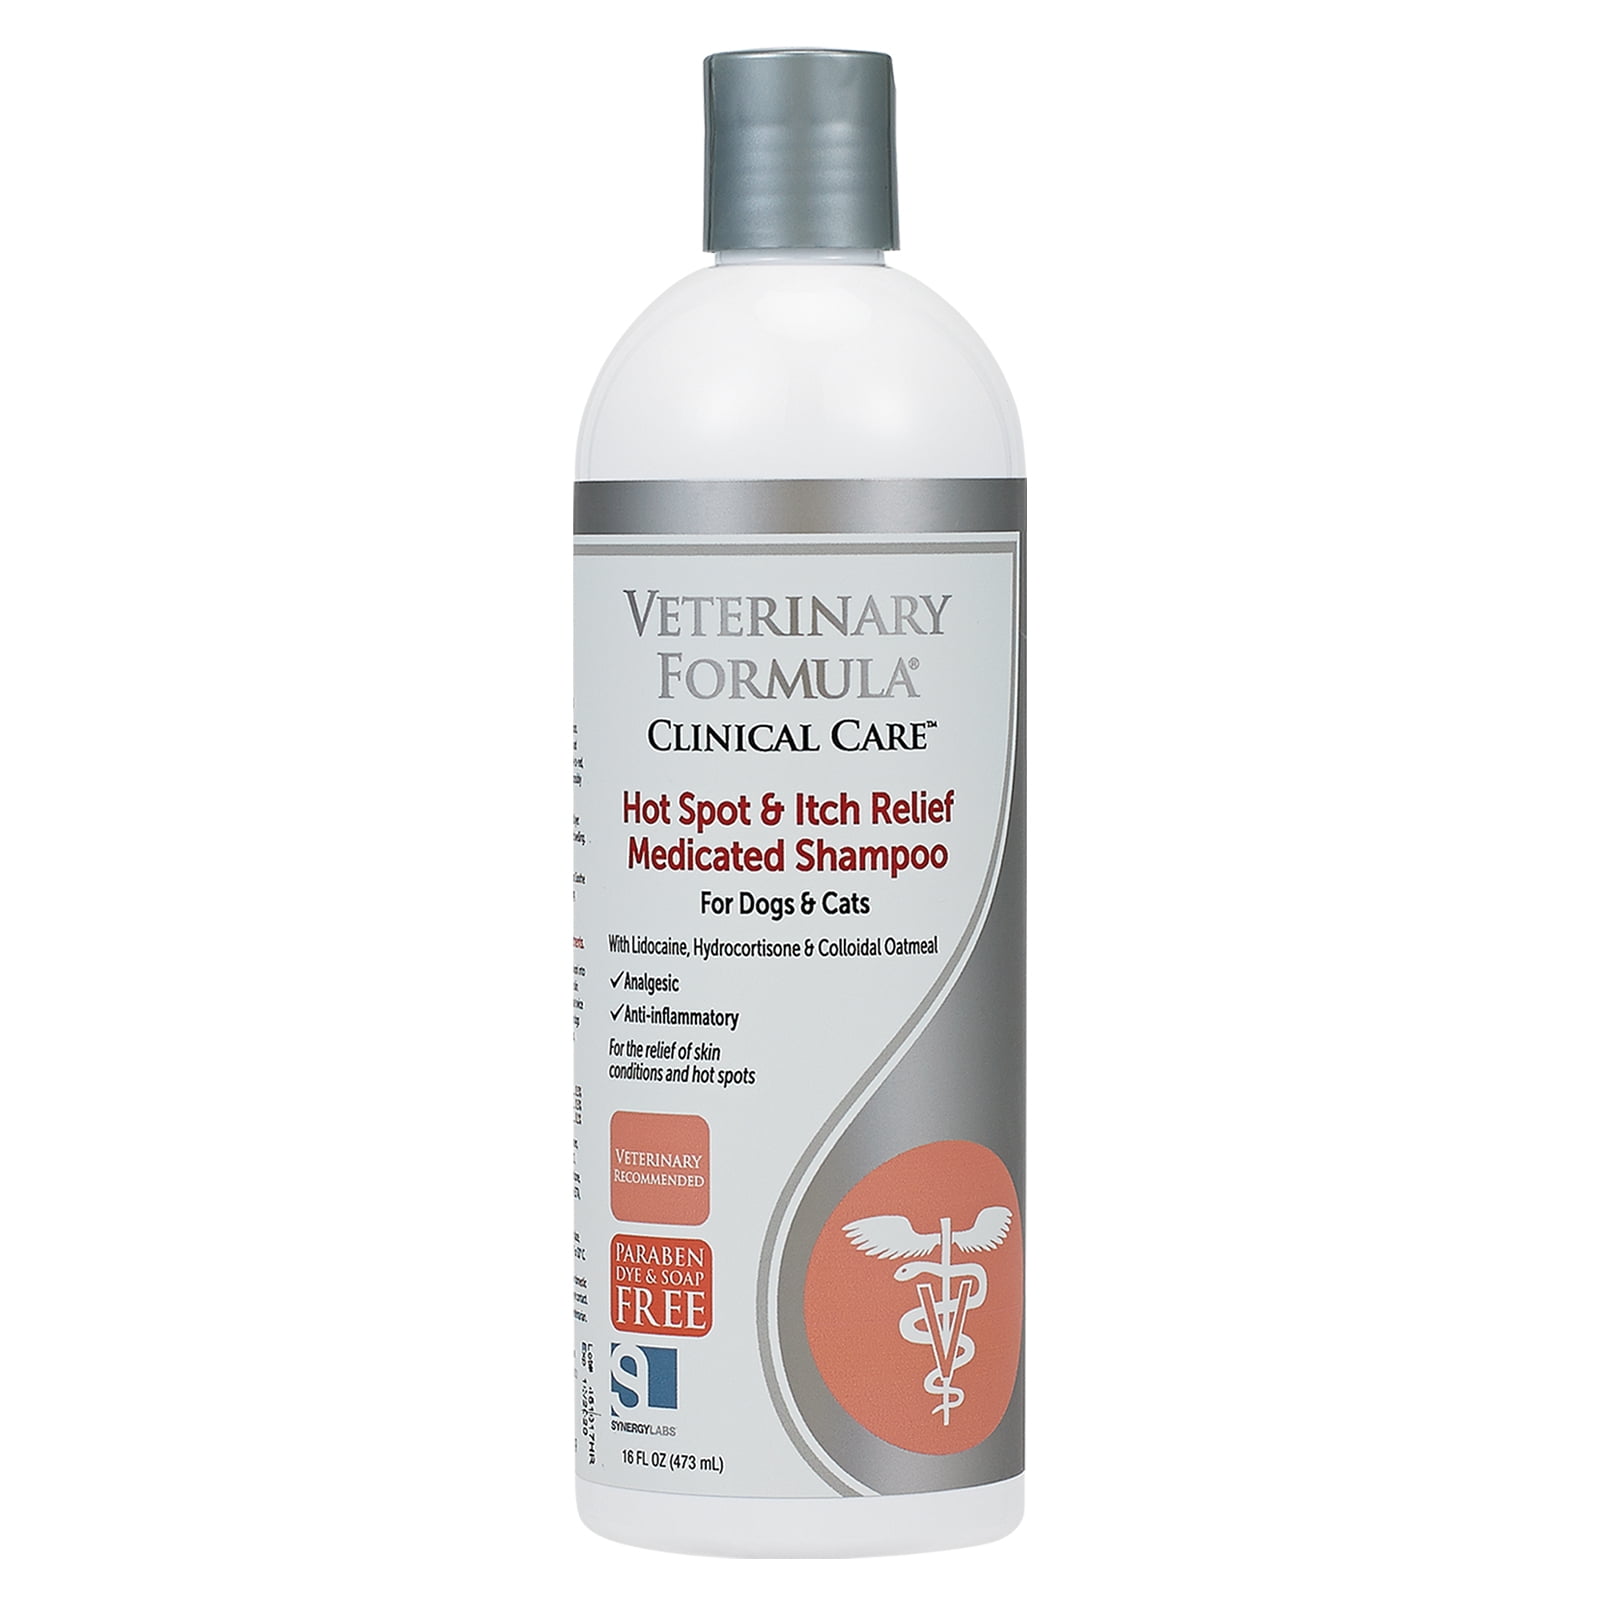 Veterinary Formula Clinical Care Hot Spot and Itch Relief Medicated for Dogs & Cats - Walmart.com